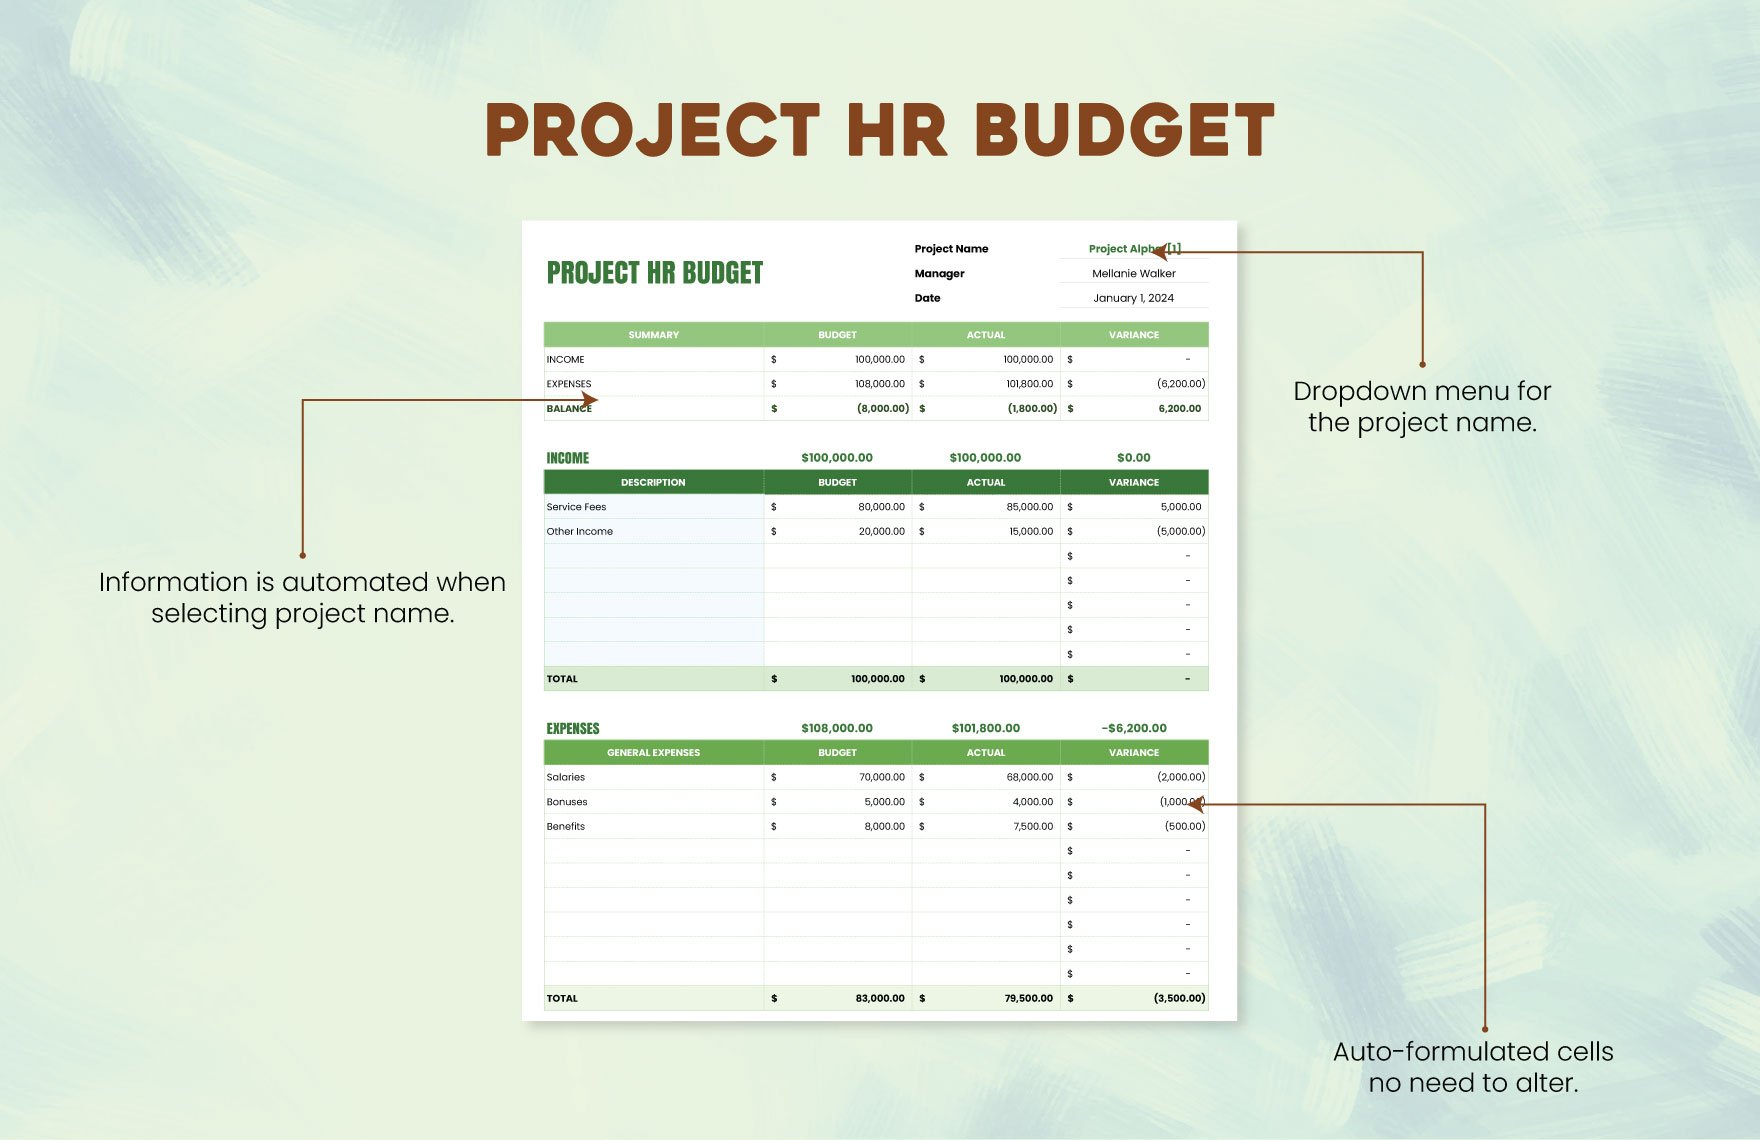 Project HR Budget Template